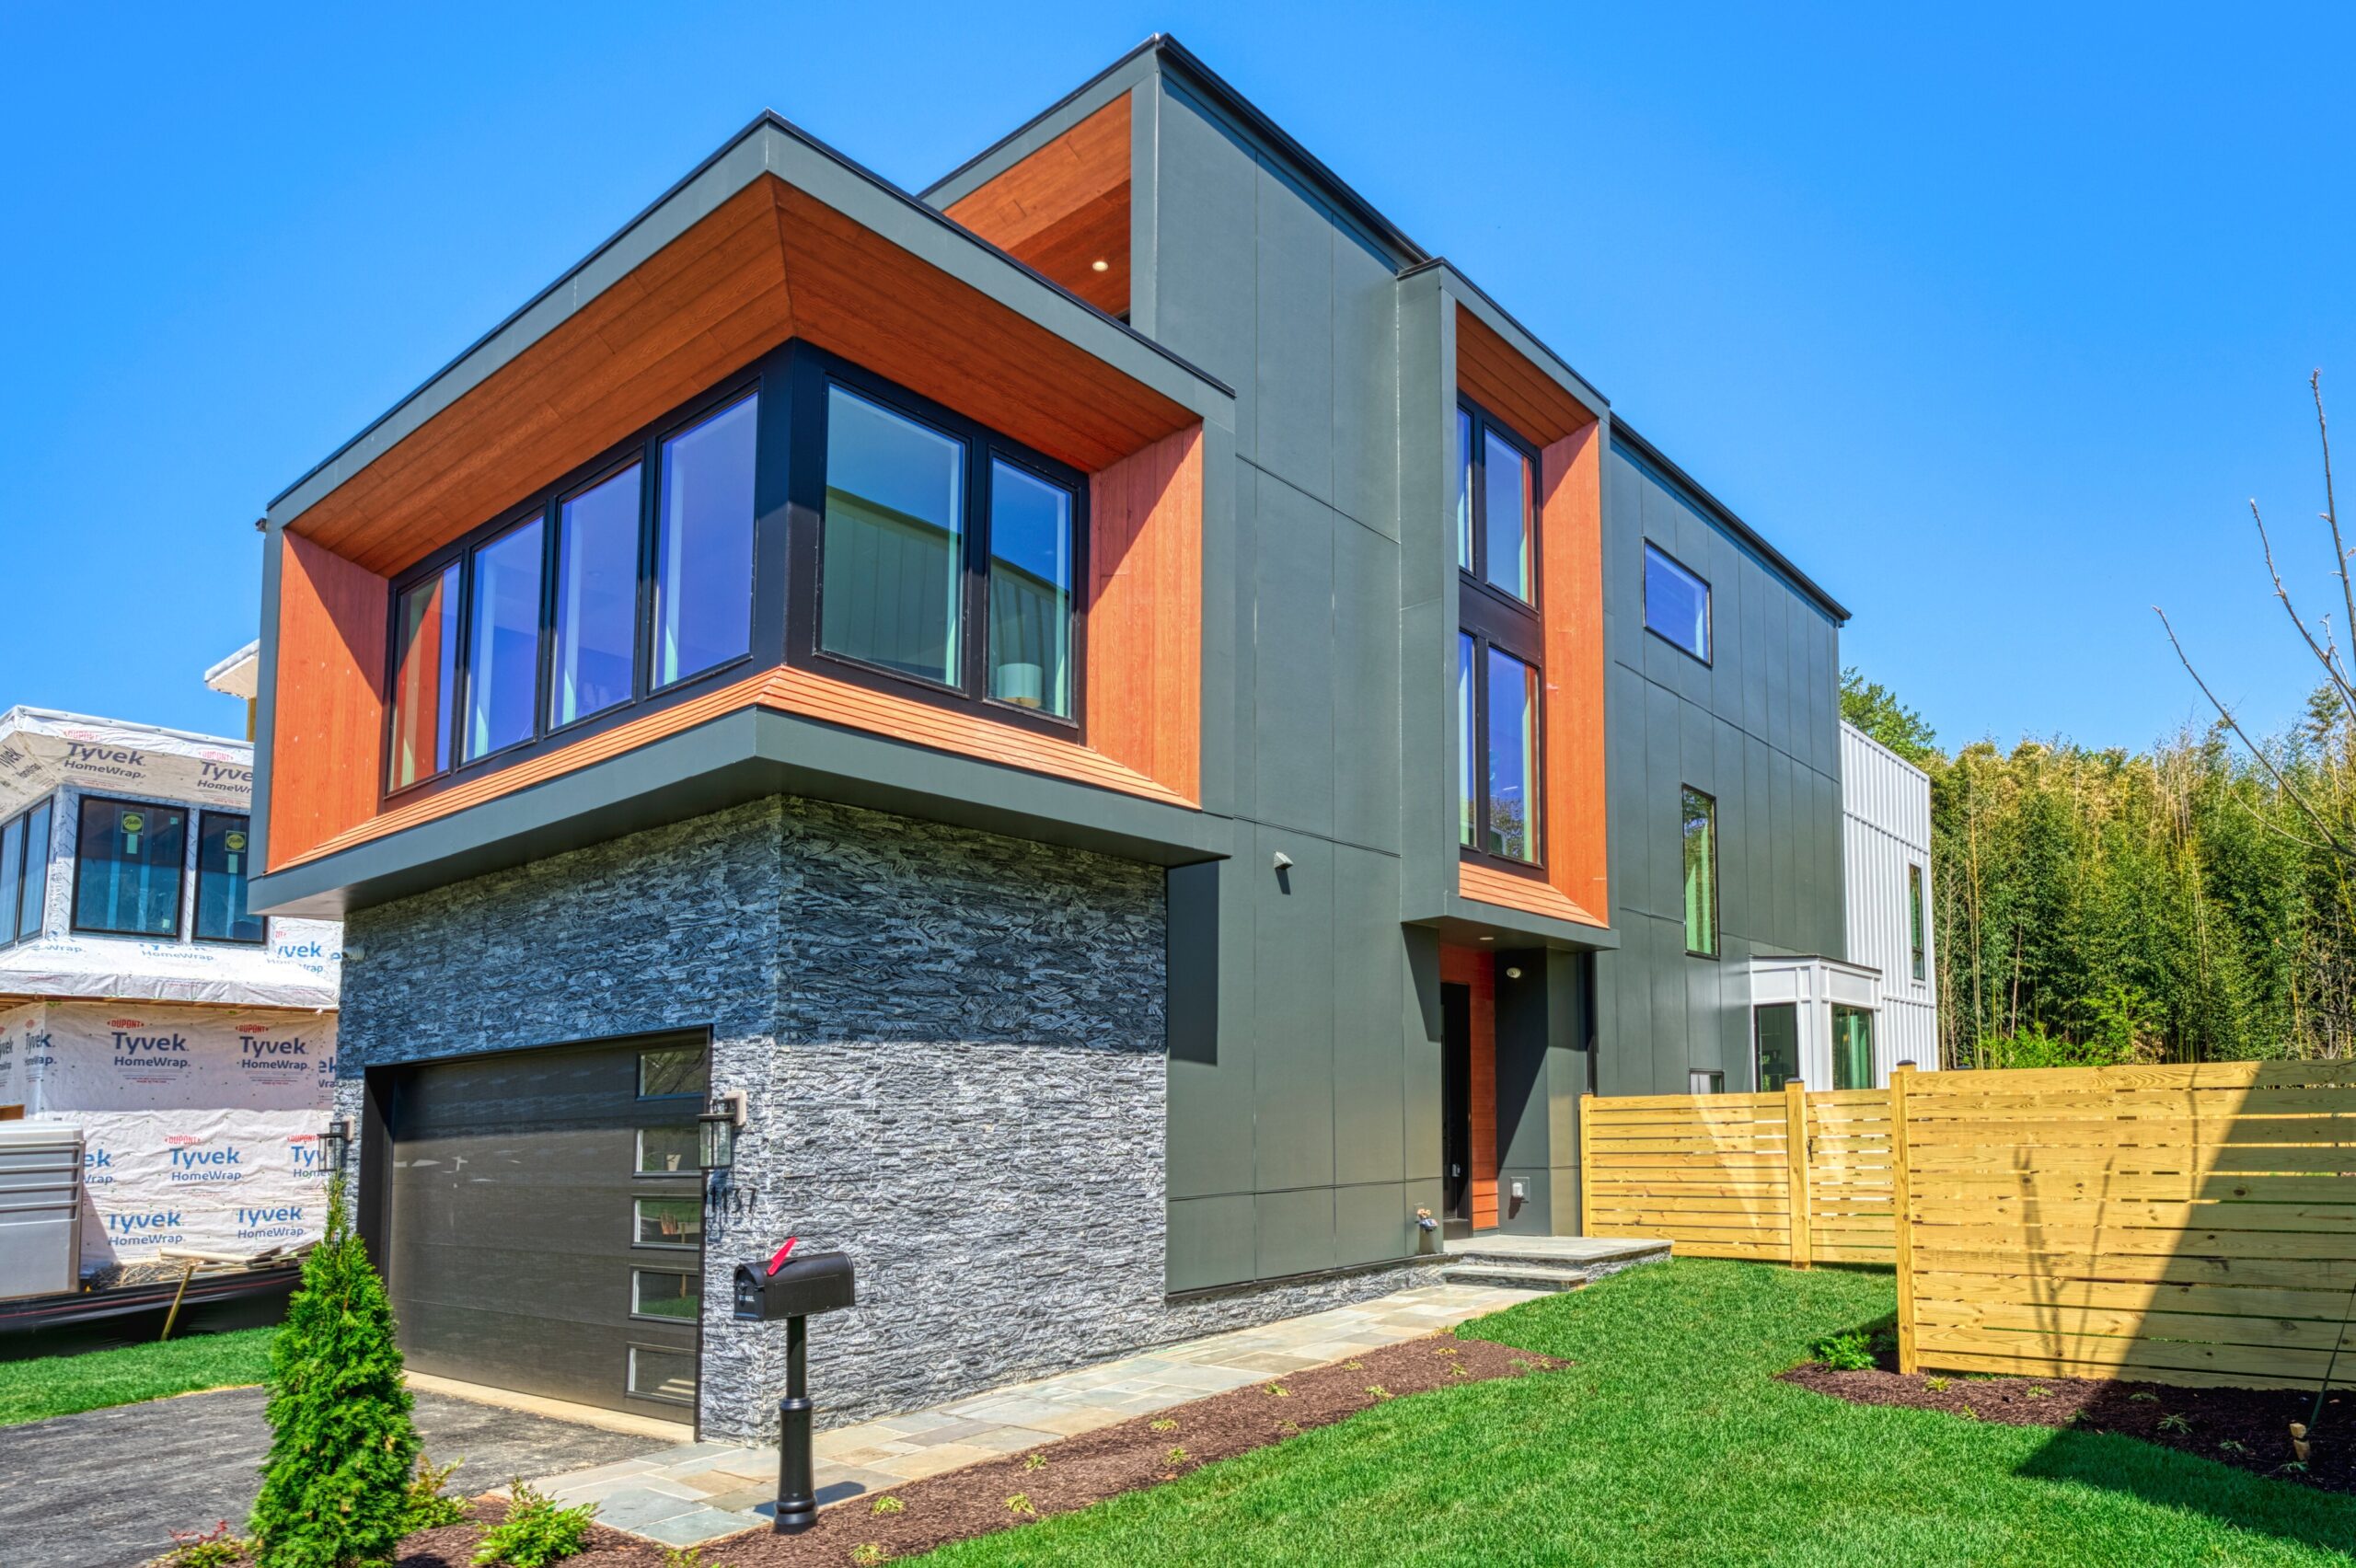 Professional exterior photo of 1137 Buchanan St in McLean, VA - showing the right side view of a brand new construction modern home with fenced in backyard